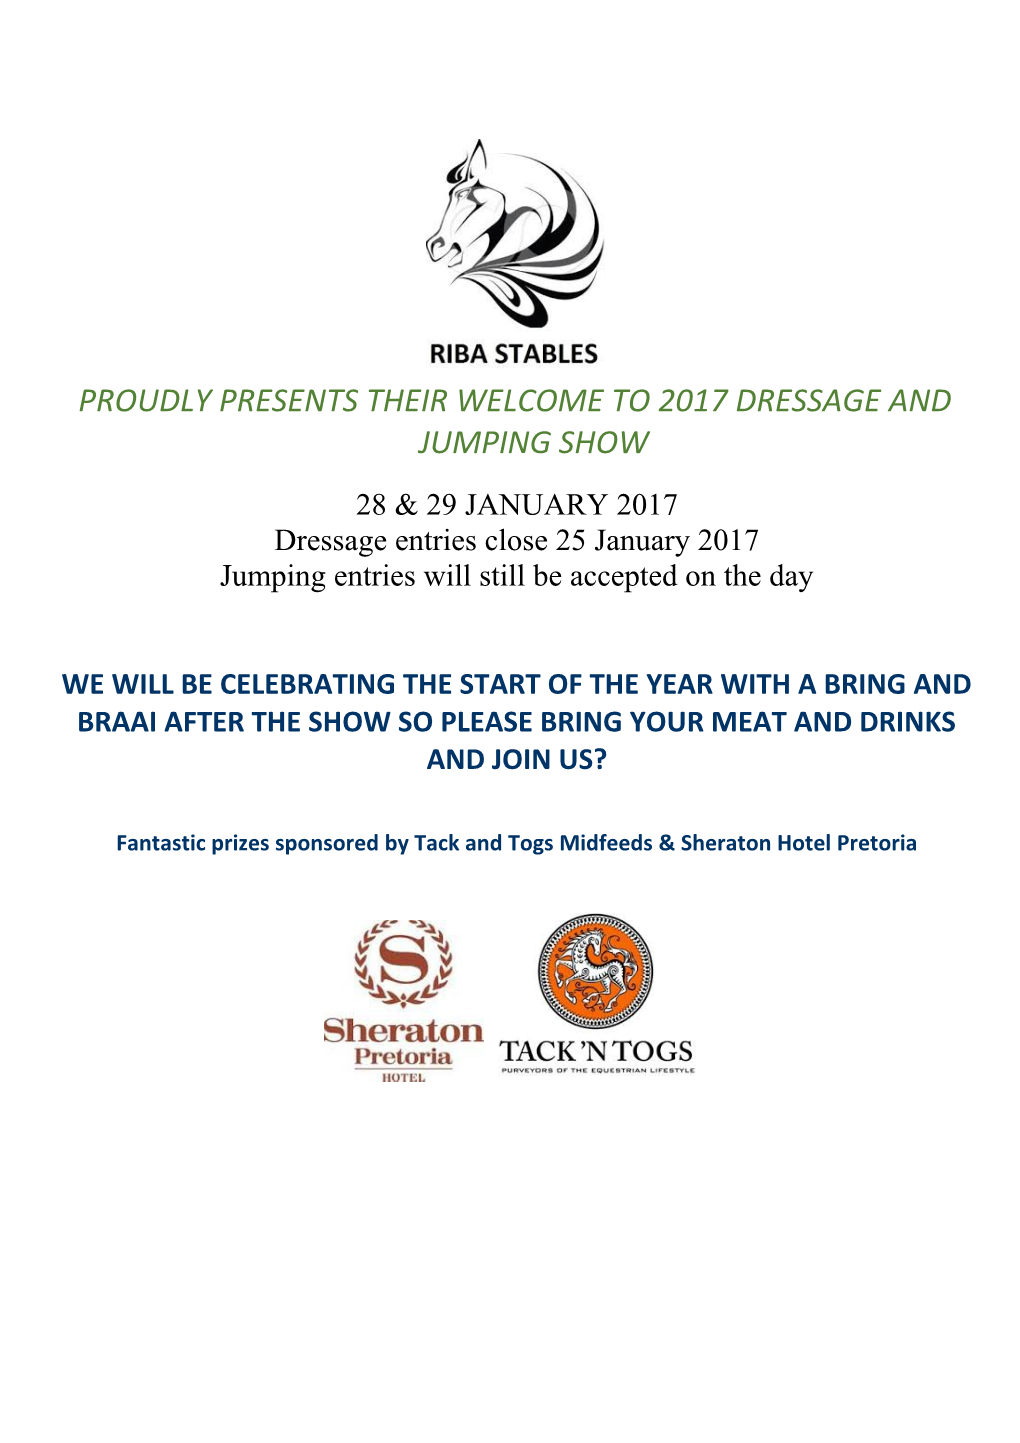 Proudly Presents Their Welcome to 2017Dressage and Jumping Show